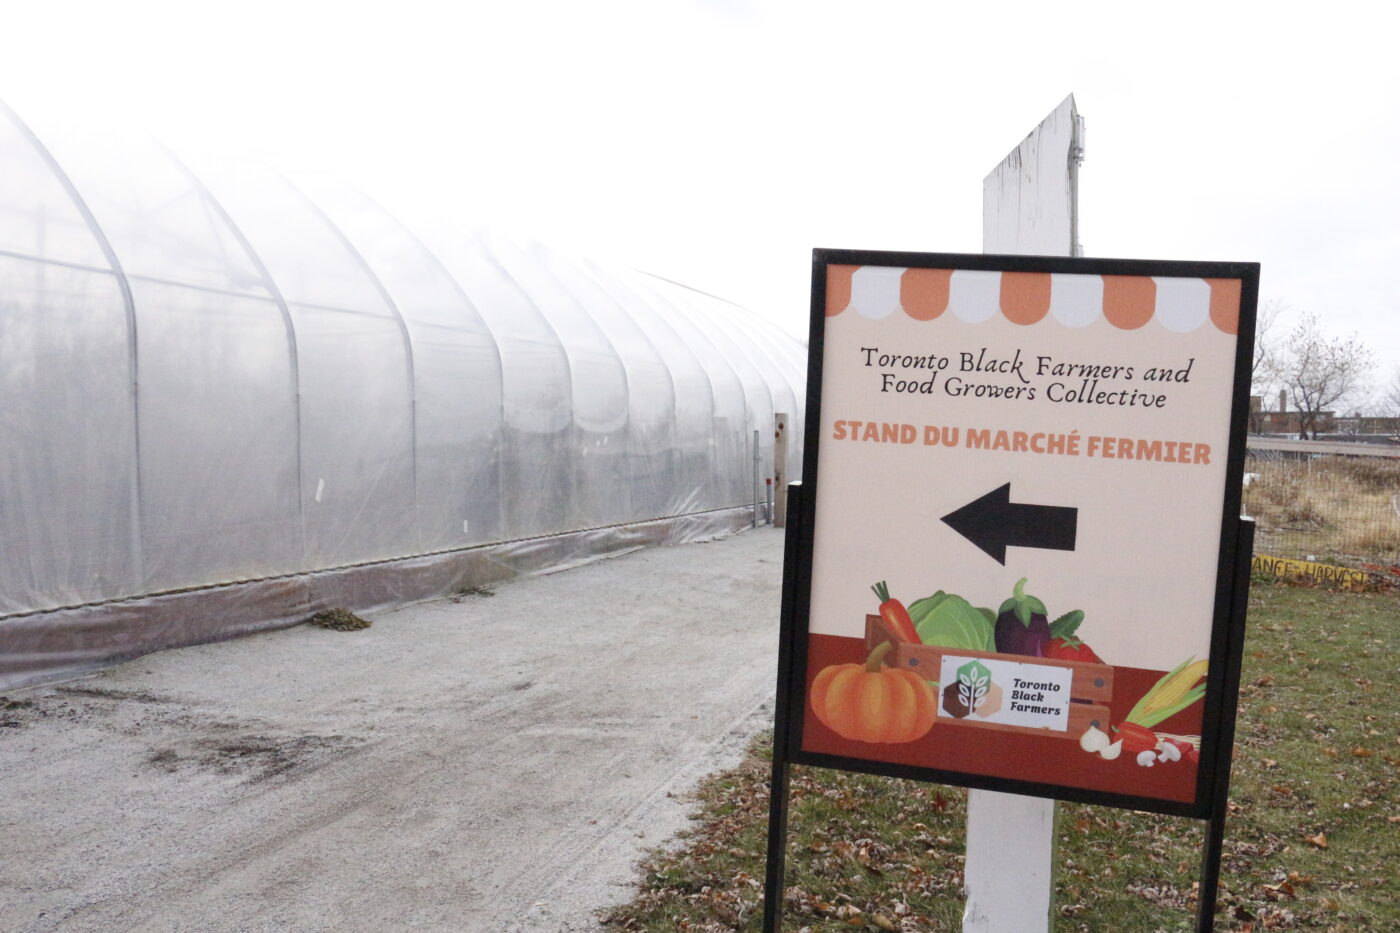 The Toronto Black Farmers and Food Growers Collective board outside their greenhouse in Downsview Park